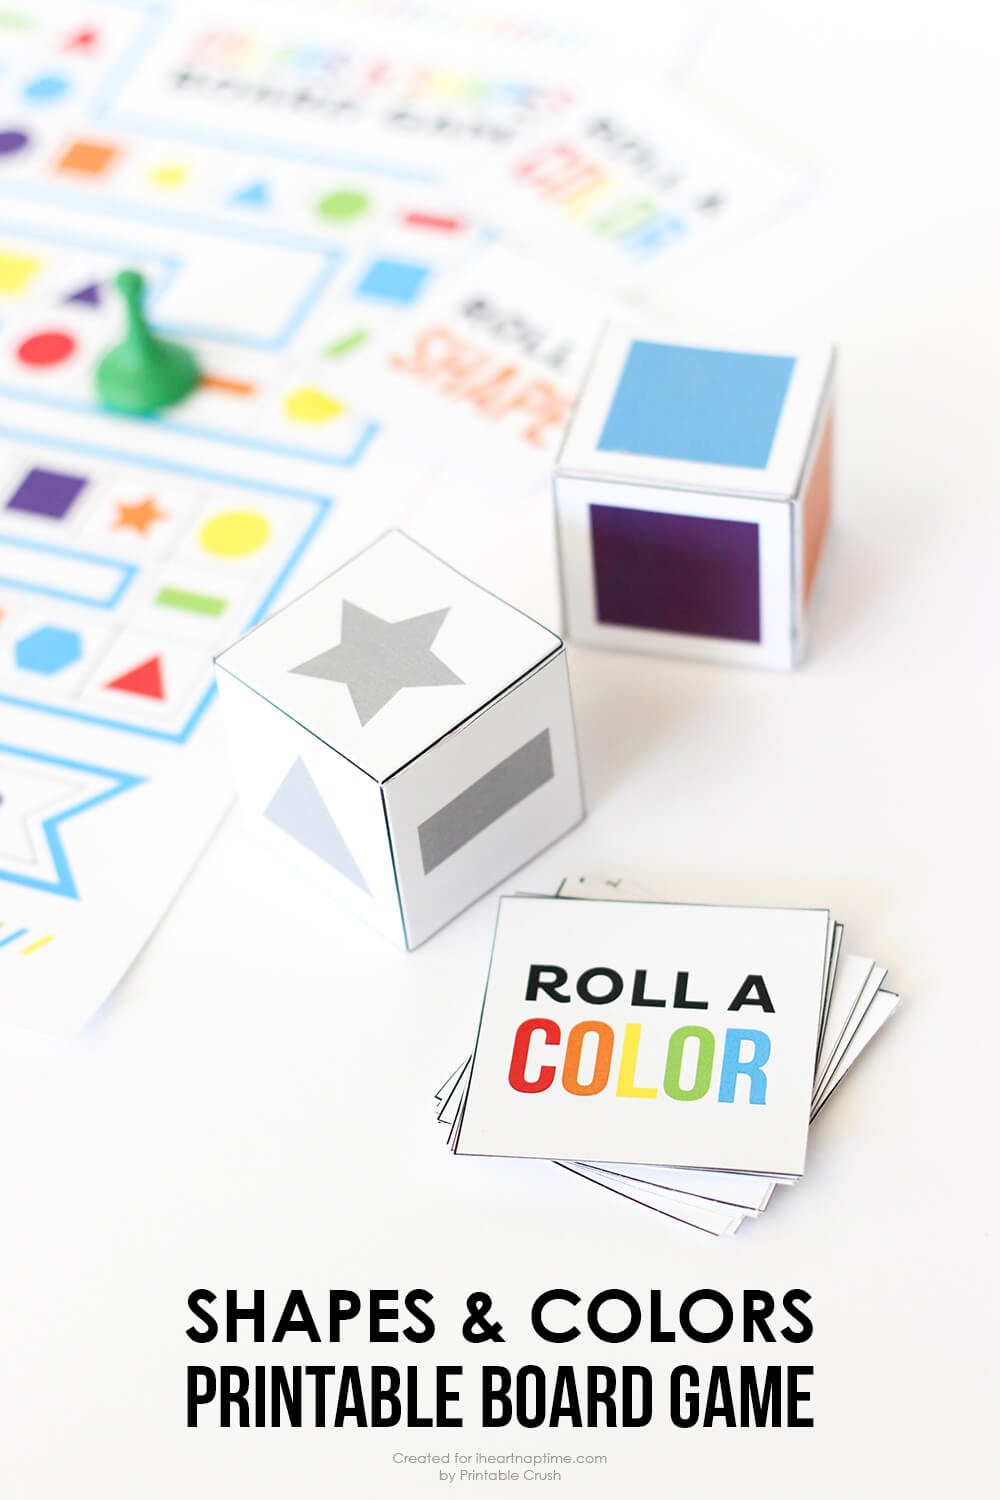 Shapes and Colors Printable Board Game